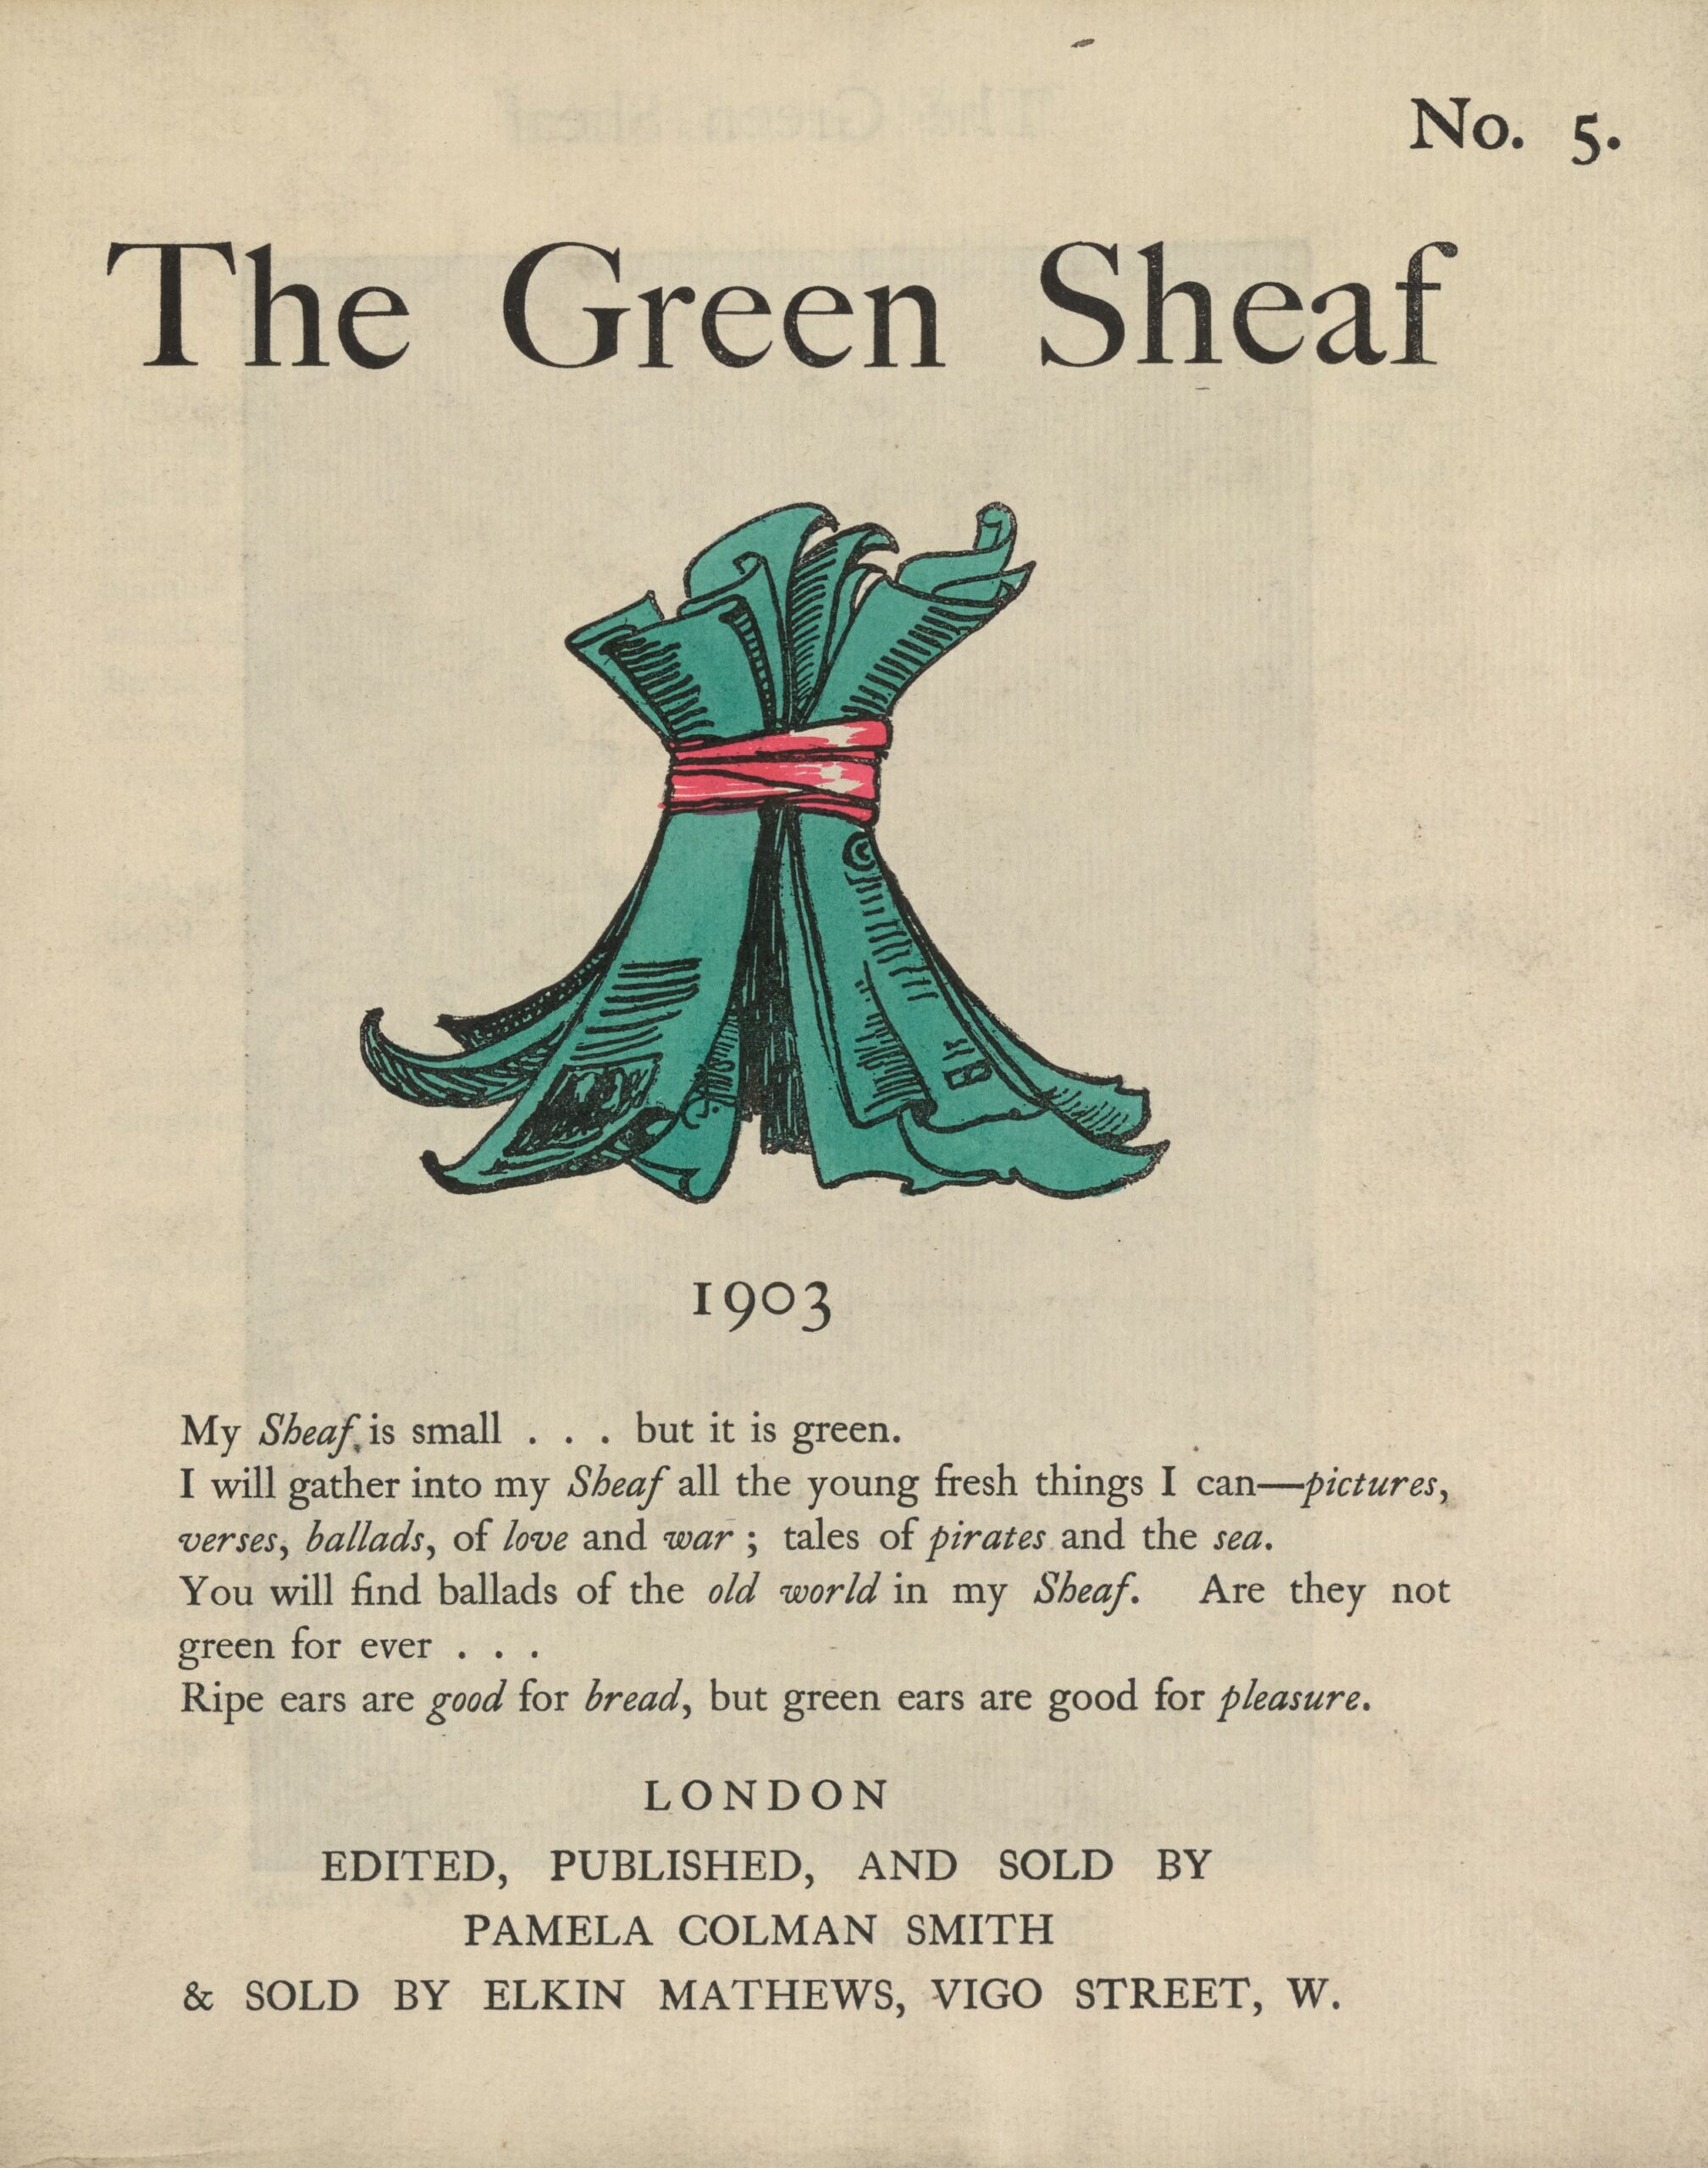 The hand-coloured illustration is centered on the tan page. In the top right corner, the text “No. 5” is printed. Above the illustration, near the top of the page, the text “The Green Sheaf” is printed in black ink in a large serif font. Next follows the illustration of green-coloured printed and illustrated pages, tied together in a sheaf with a red ribbon. The artist’s initialed signature “PCS” is visible on one of the pages. Below the illustration, centered on the page, is the year, 1903, followed, in slightly smaller text, by Smith’s manifesto, first printed at the back of the first volume of The Green Sheaf “My Sheaf is small… but it is green. / I will gather into my Sheaf all the fresh young things I can—pictures, / verses, ballads, of love and war; tales of pirates and the sea. / You will find ballads of the old world in my Sheaf. Are they not / green for ever… / Ripe ears are good for bread, but green ears are good for pleasure.” Below this, centered, is printed: “LONDON / EDITED, PUBLISHED AND SOLD BY / PAMELA COLMAN SMITH / & SOLD BY ELKIN MATTHEWS, VIGO STREET, W.”